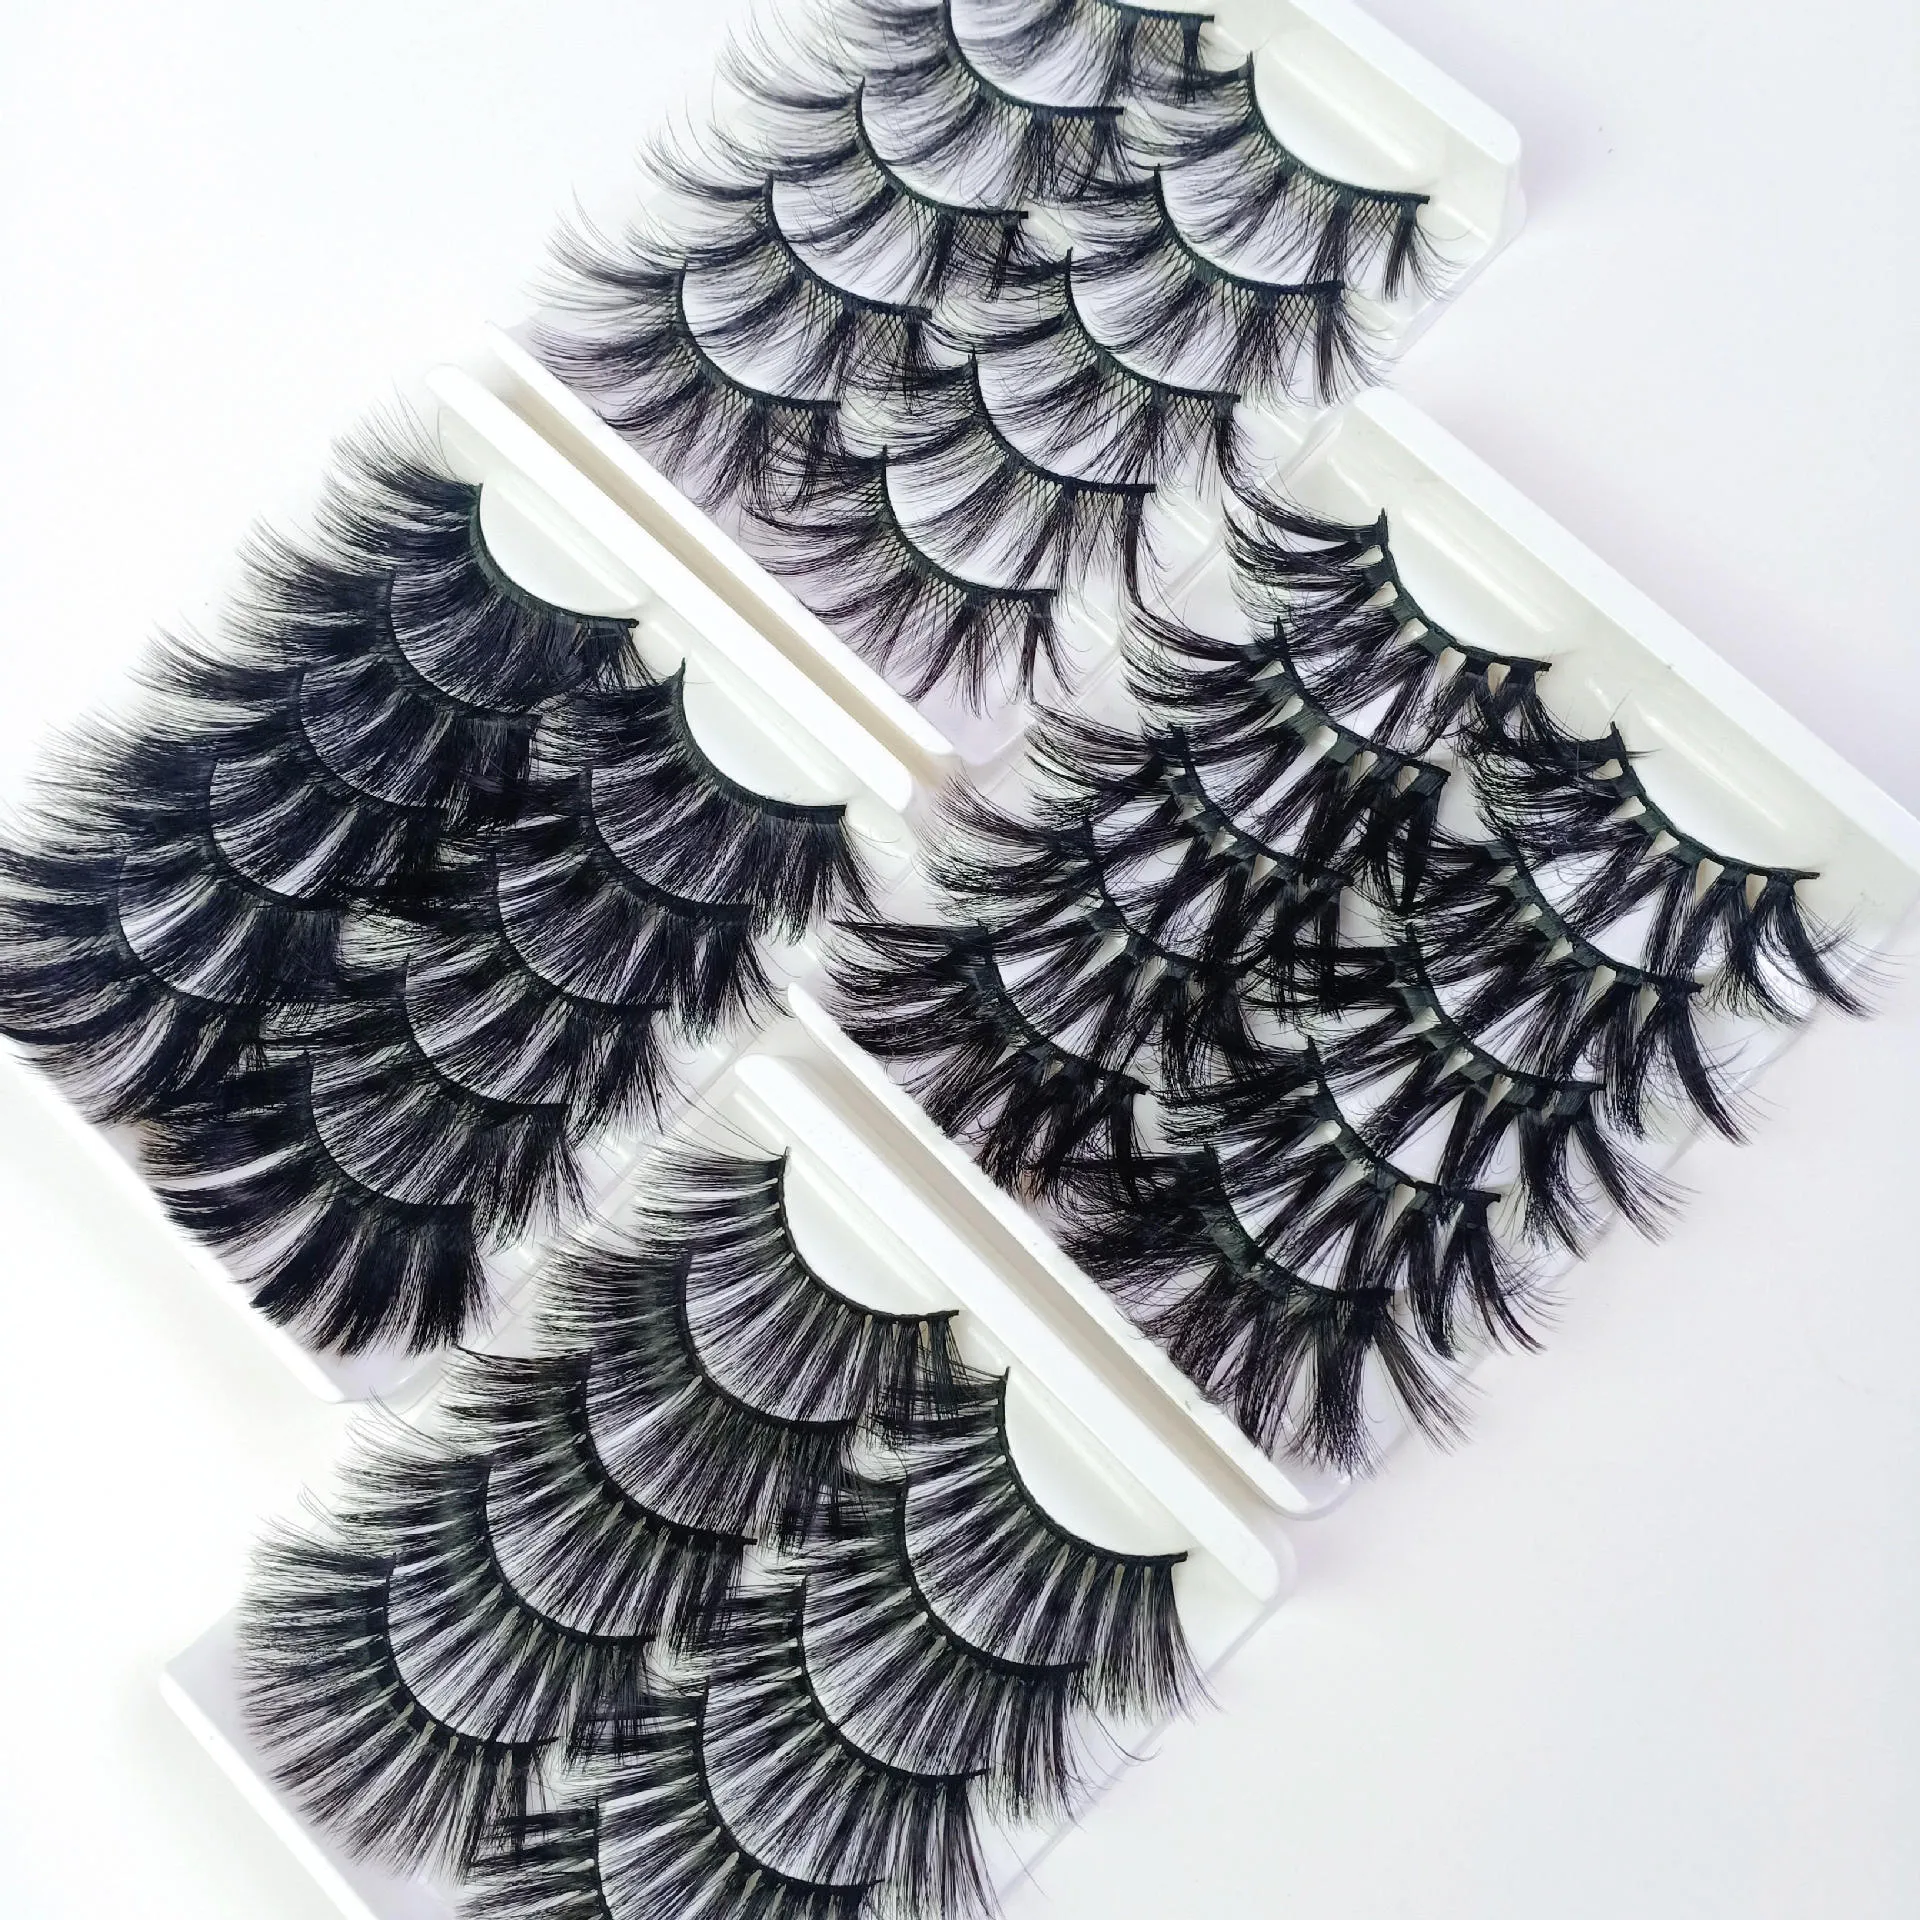 25MM Fake Eyelashes 5 Pairs with Retail Box Natural Long Thick Handmade Hair Extension Full Strip Beauty for Makeup